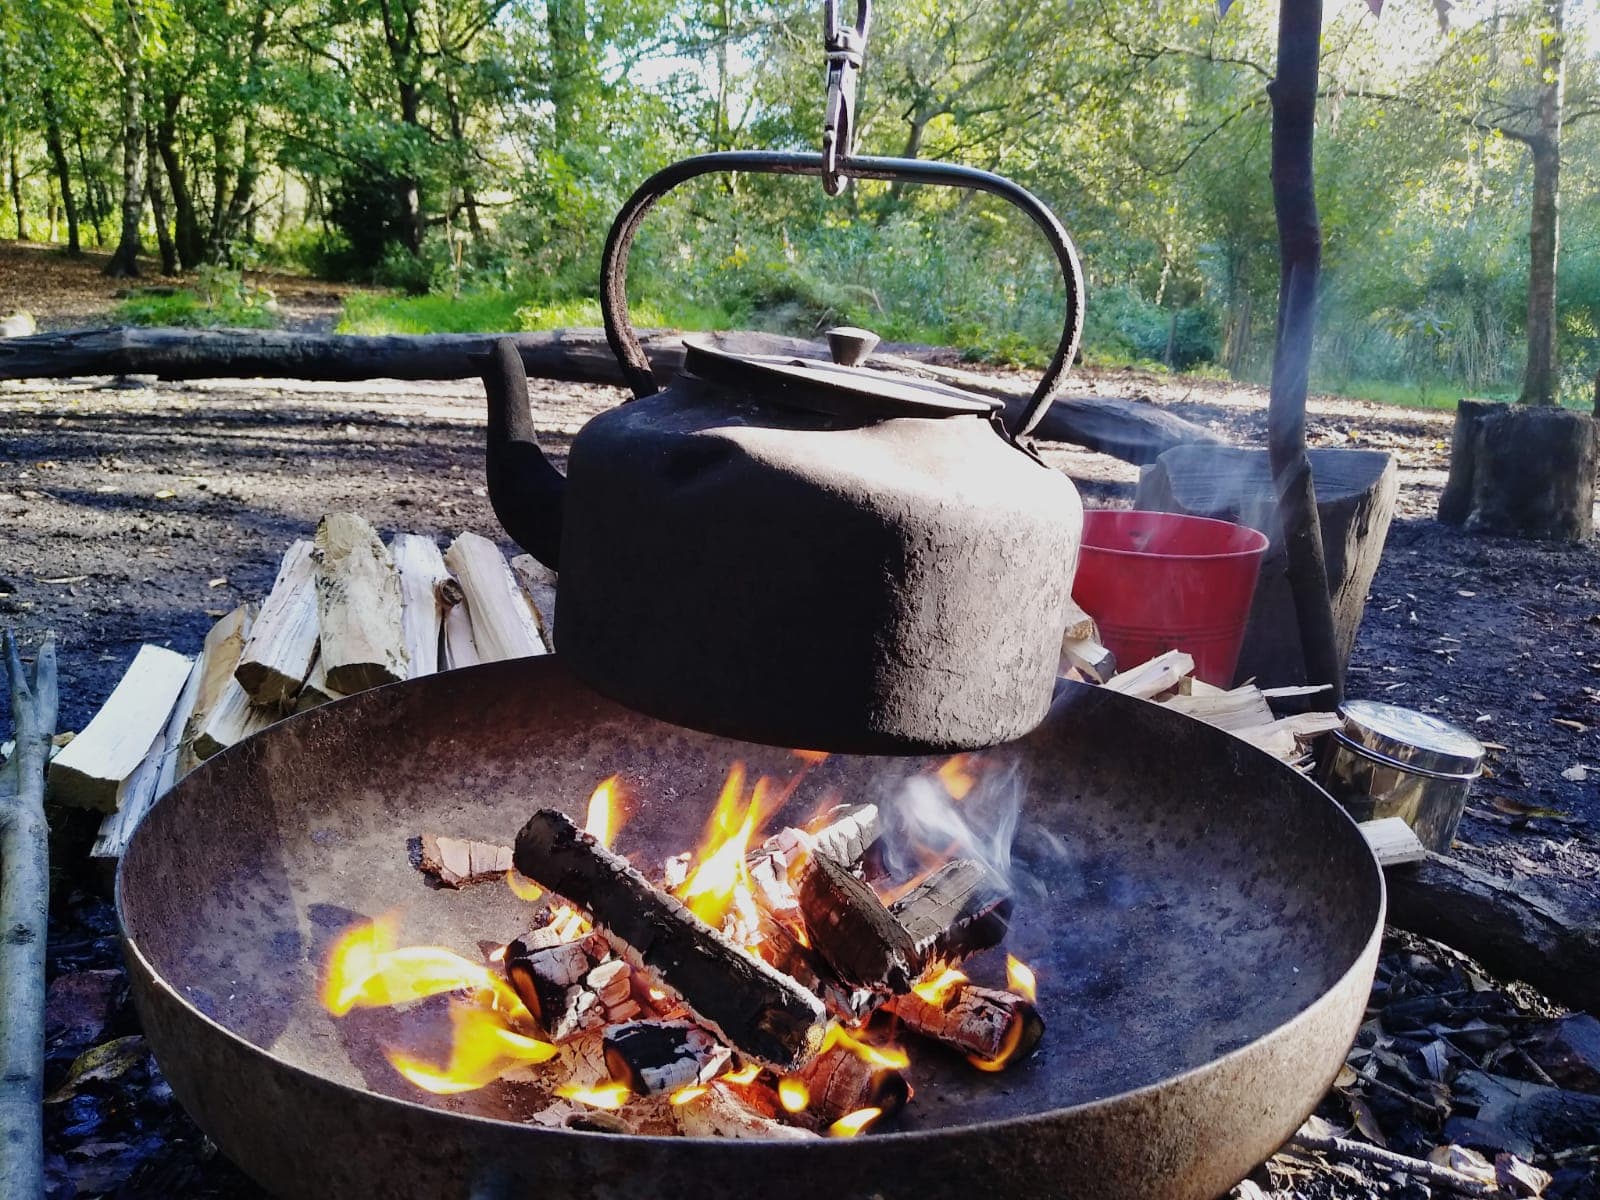 water boiling in a kettle over the fire pit in Summerseat